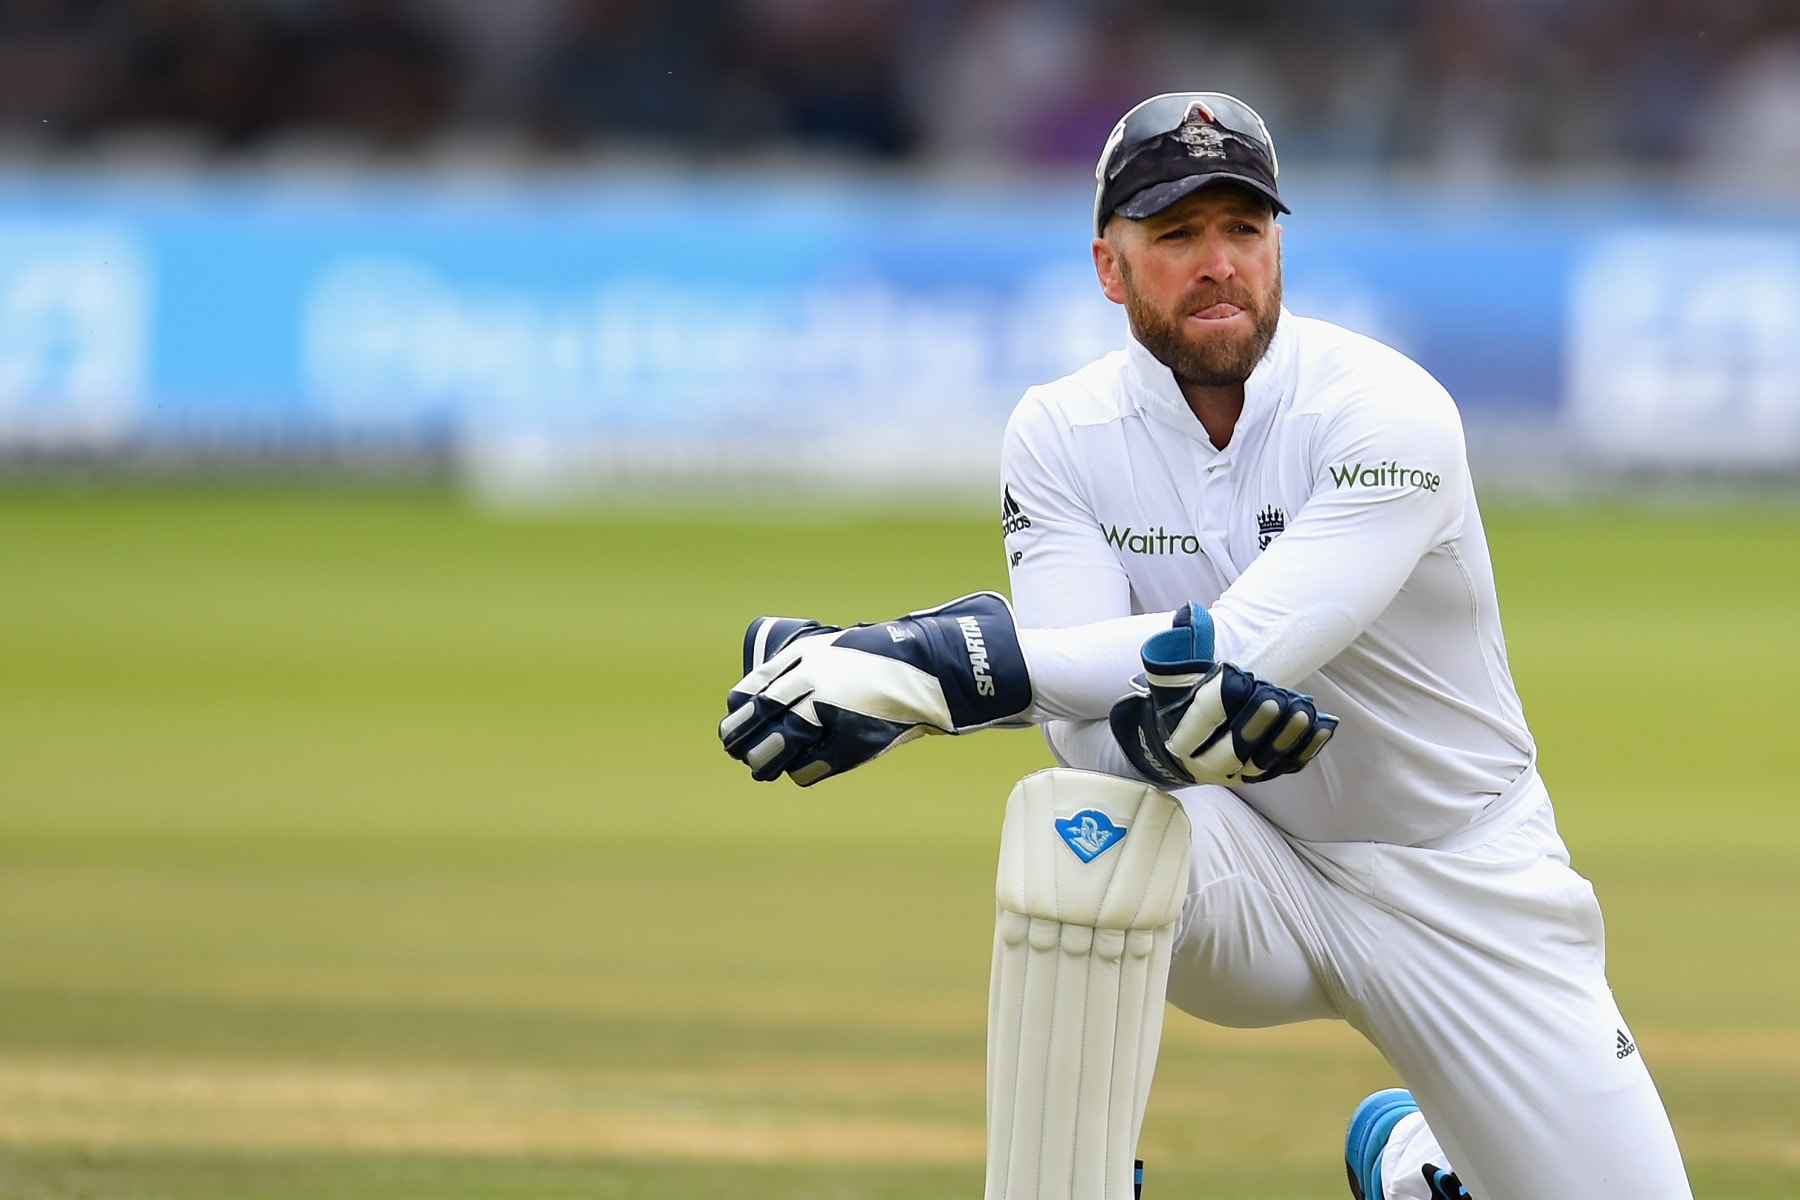 Matt Prior – From one pro to another